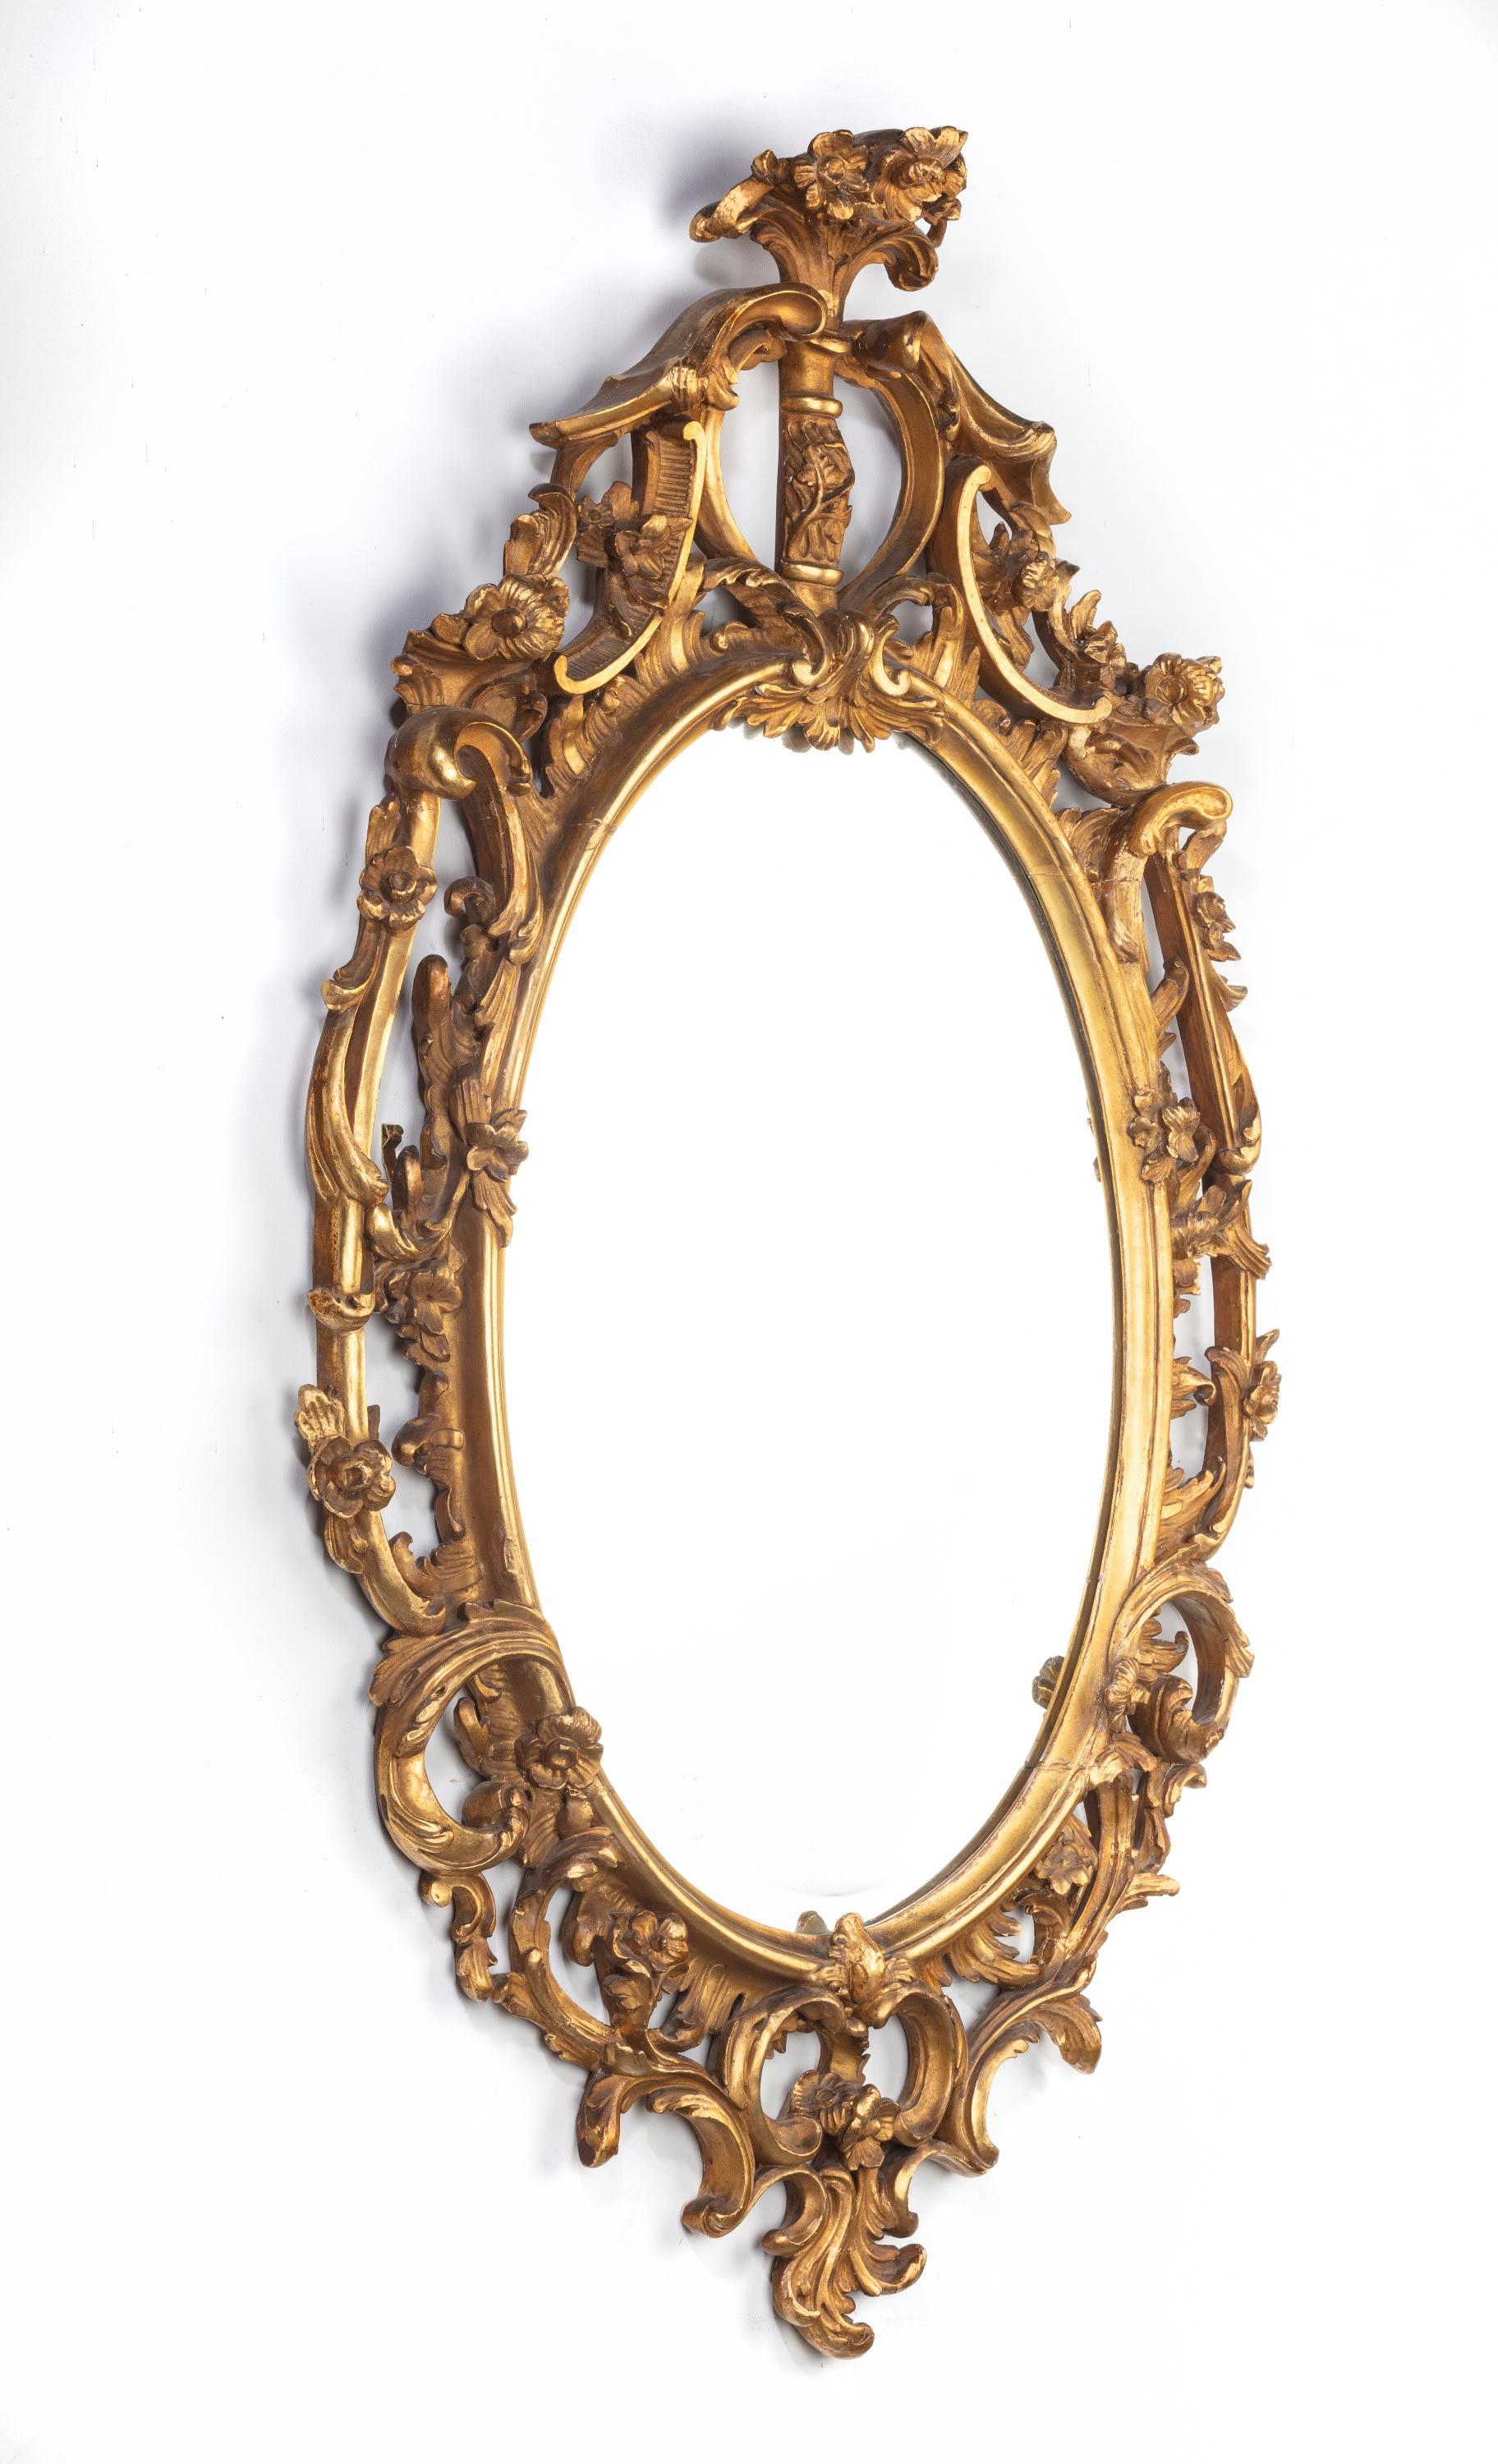 A good pair of George III period oval, giltwood mirrors. The gilding was probably restored in the 19th century with an oil finish. With attractively carved scrolled details and an abundance of foliage, flowers and leaves.
 